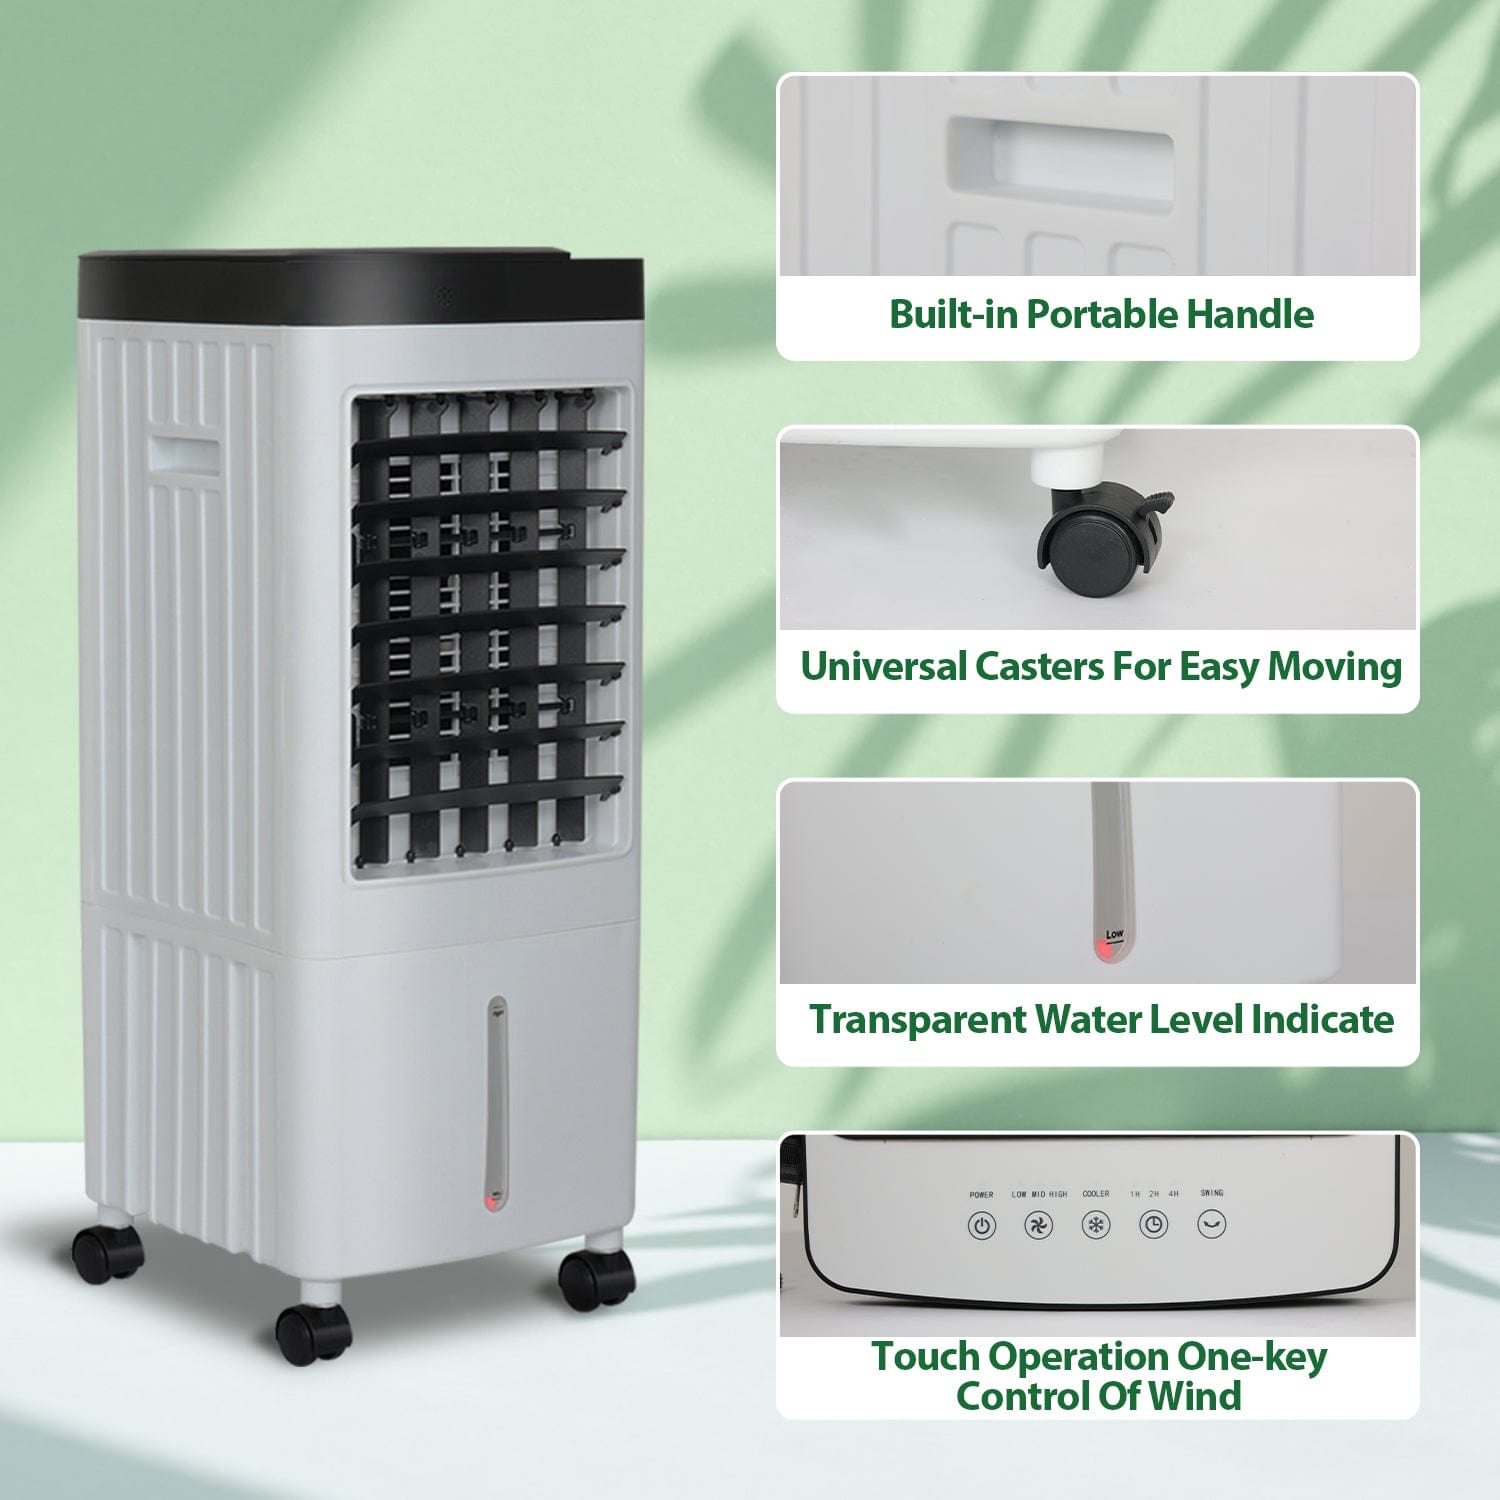 Buy Birsppy Portable Air Conditioner, Evaporative Air Cooler with